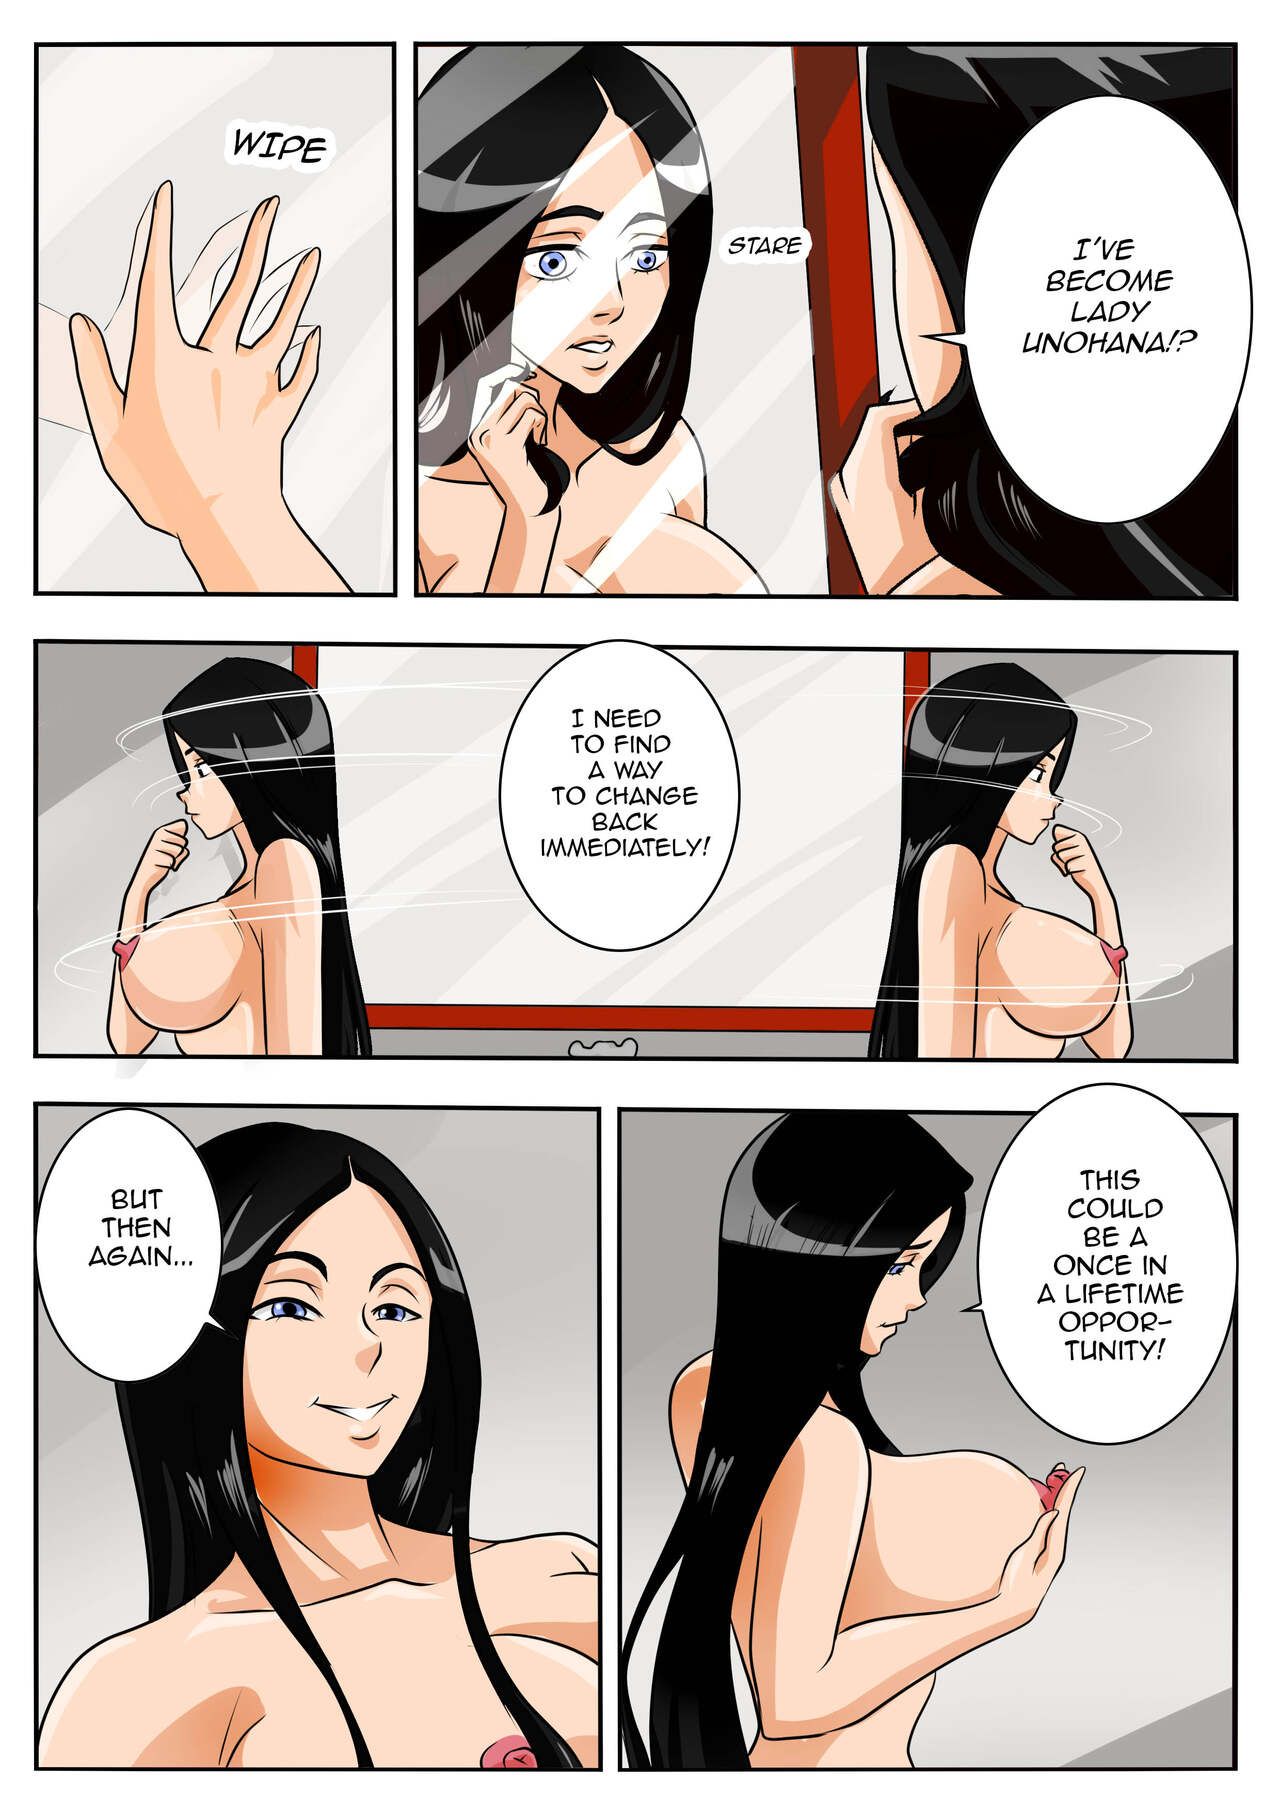 Bleach: A What If Story Part 6 Porn Comic english 37